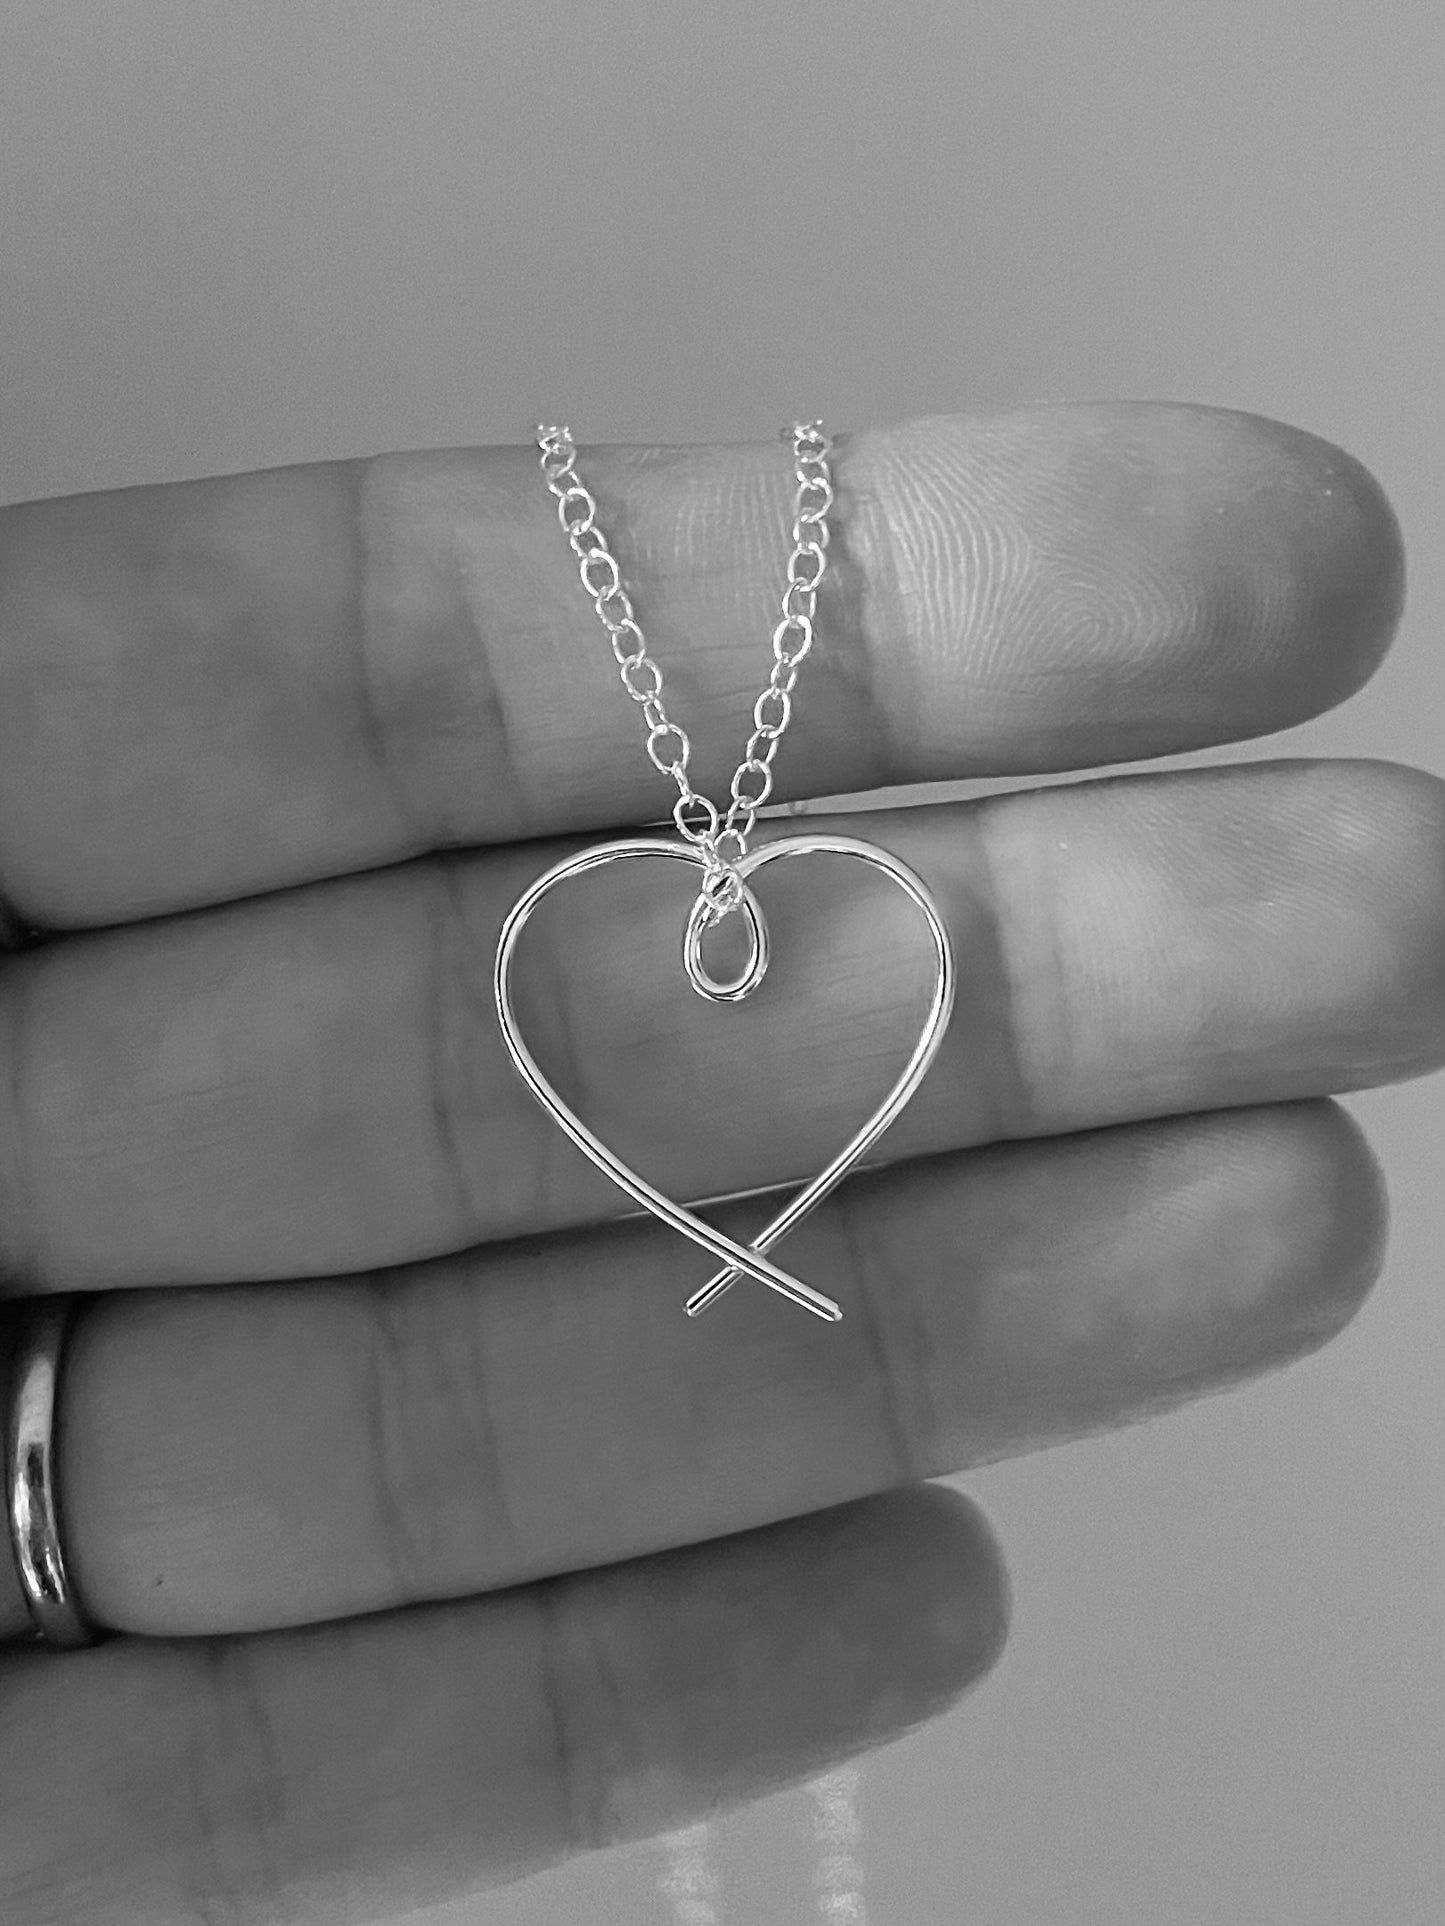 Small silver heart necklace